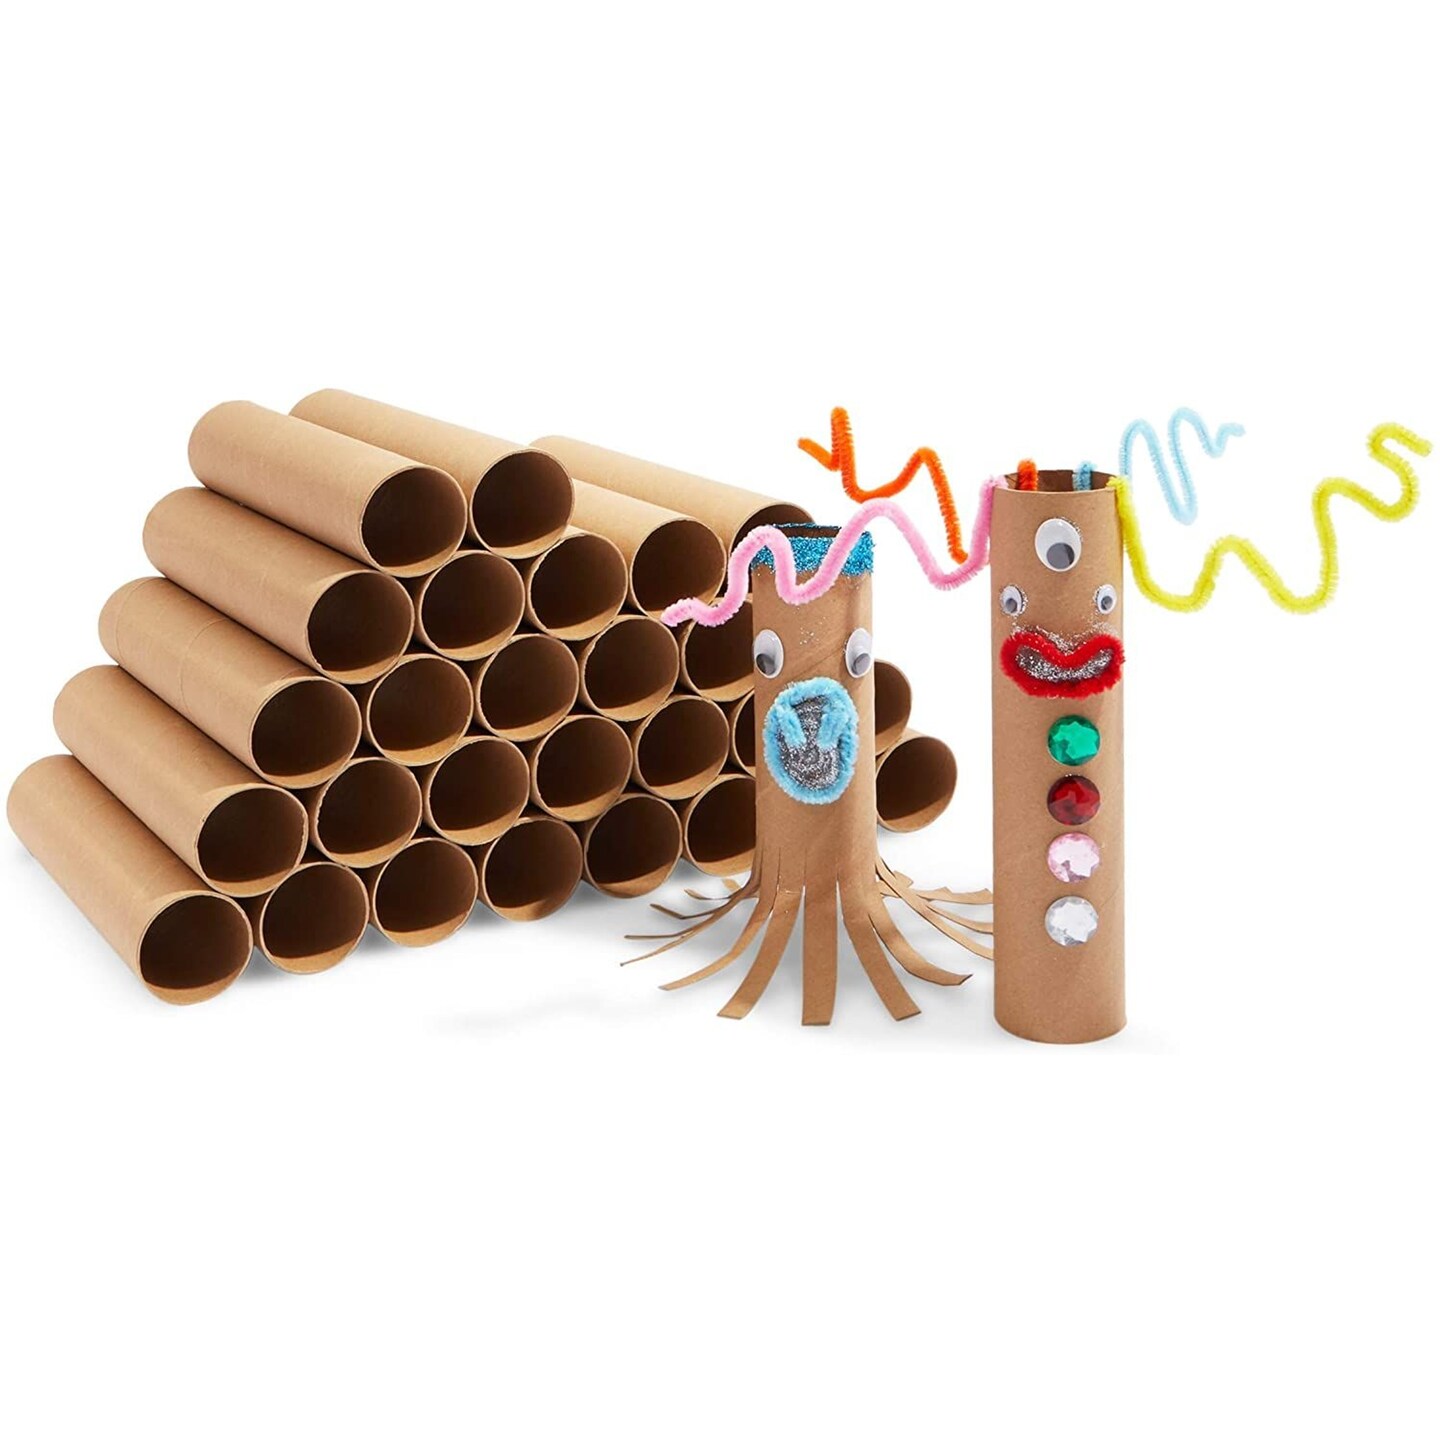 How Are Cardboard Tubes Made?